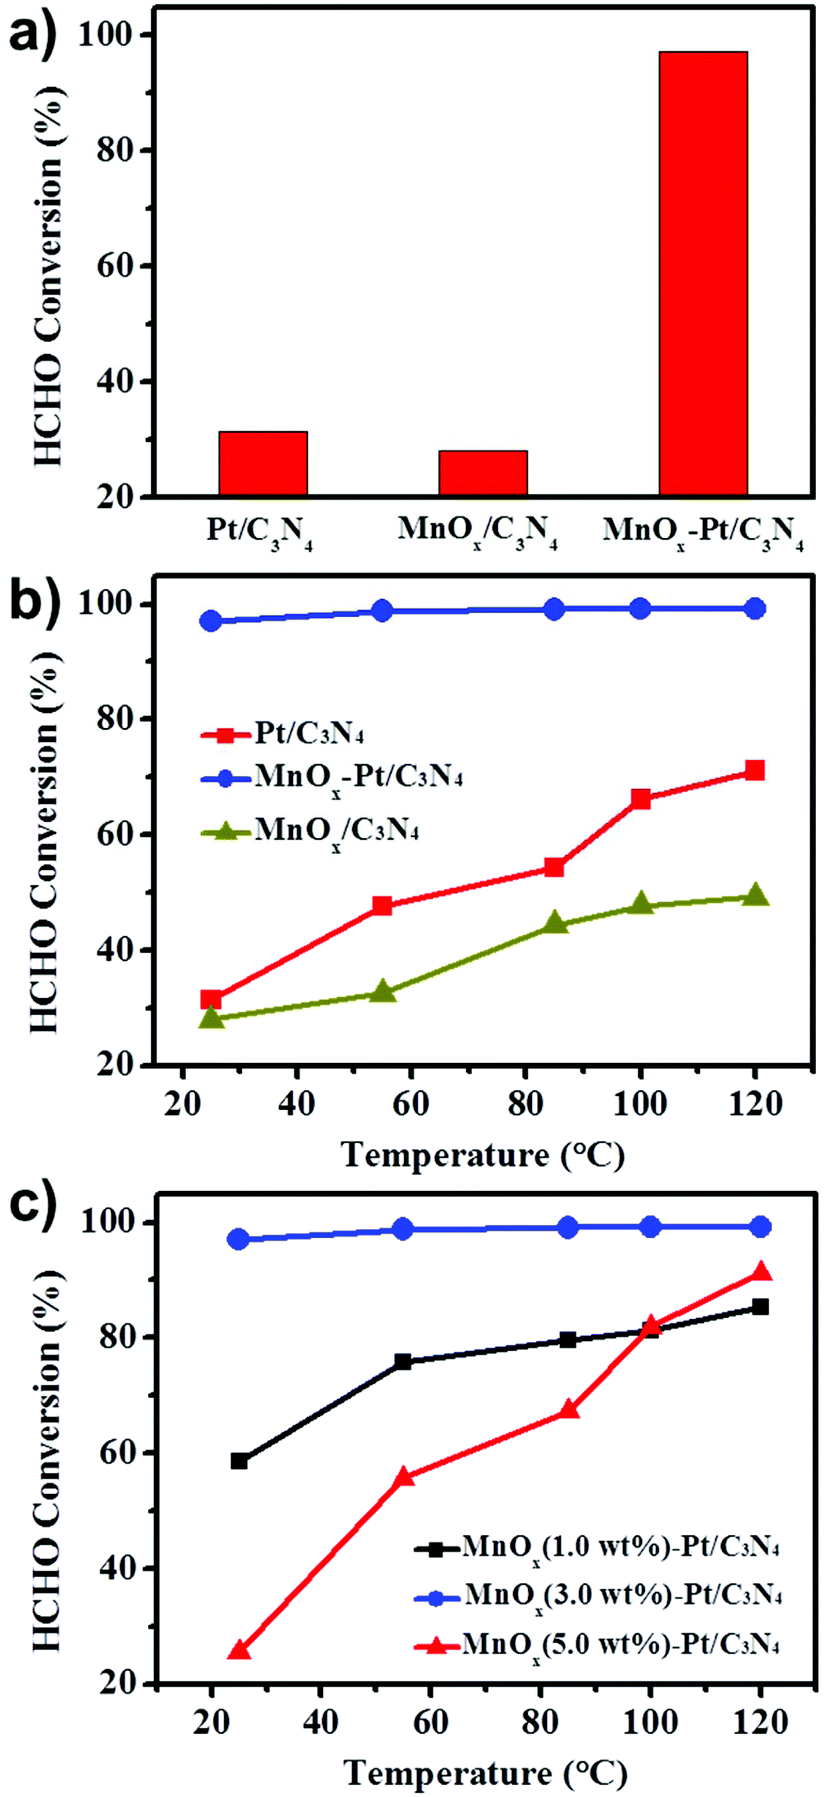 Photo Mediated Co Loading Of Highly Dispersed Mno X Pt On G C 3 N 4 Boosts The Ambient Catalytic Oxidation Of Formaldehyde Nanoscale Rsc Publishing Doi 10 1039 C8nrh